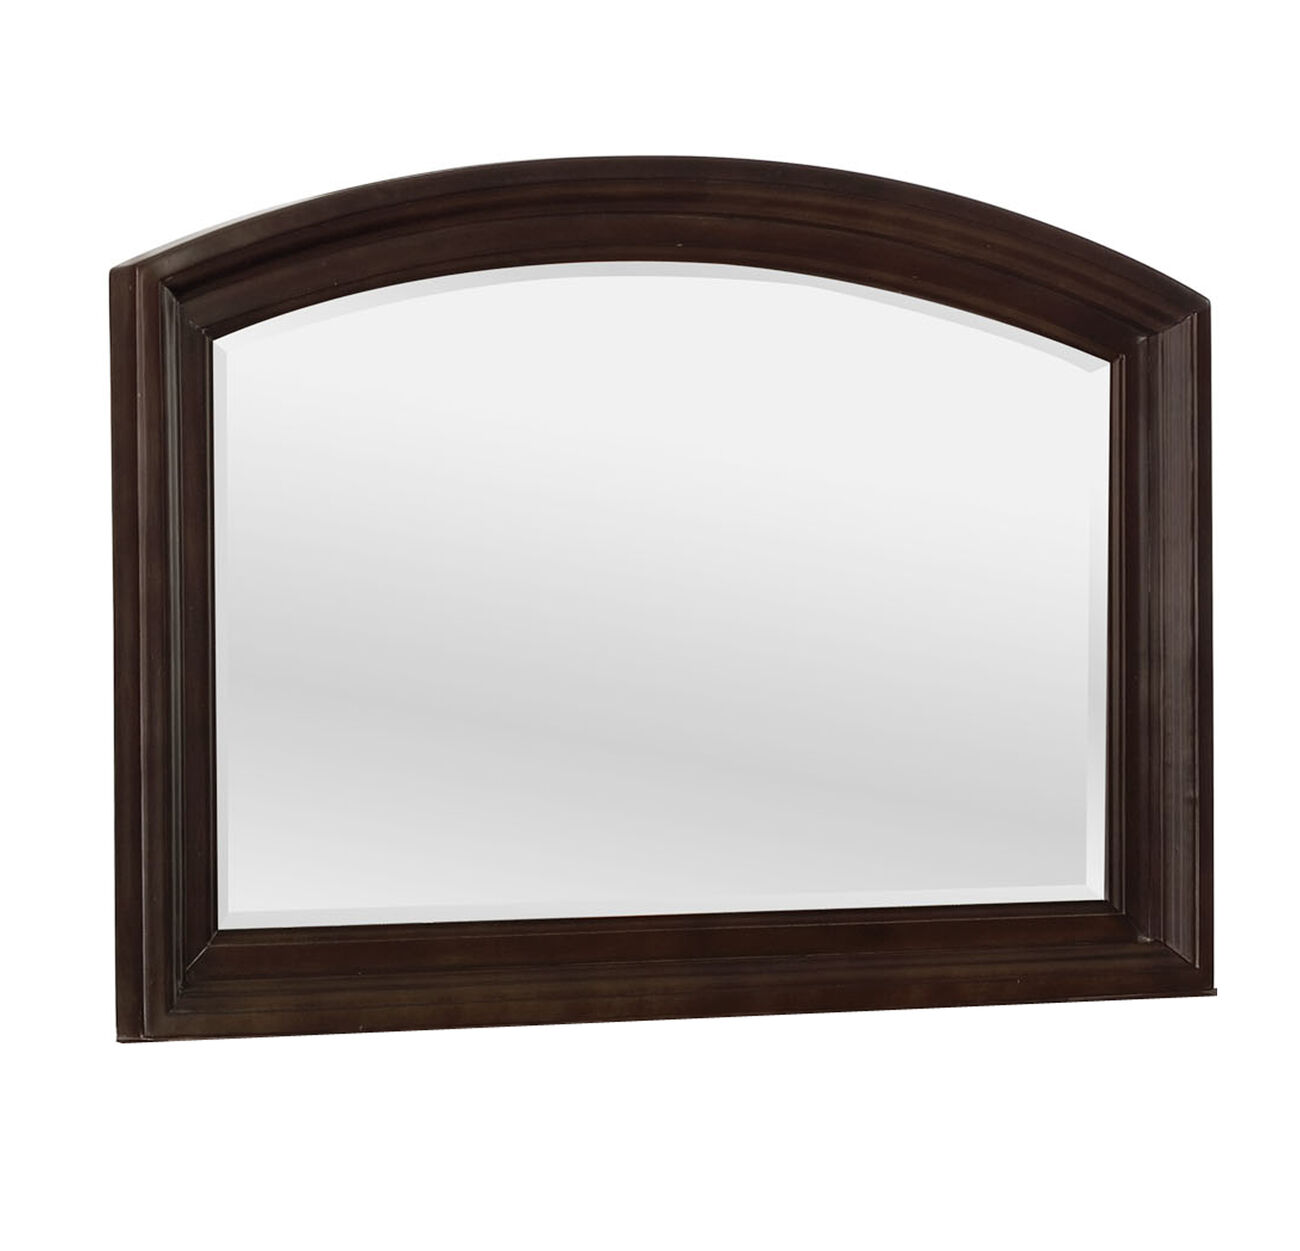 Arch Shape Dresser Top Beveled Mirror with Wooden Frame, Brown and Silver - BM215436